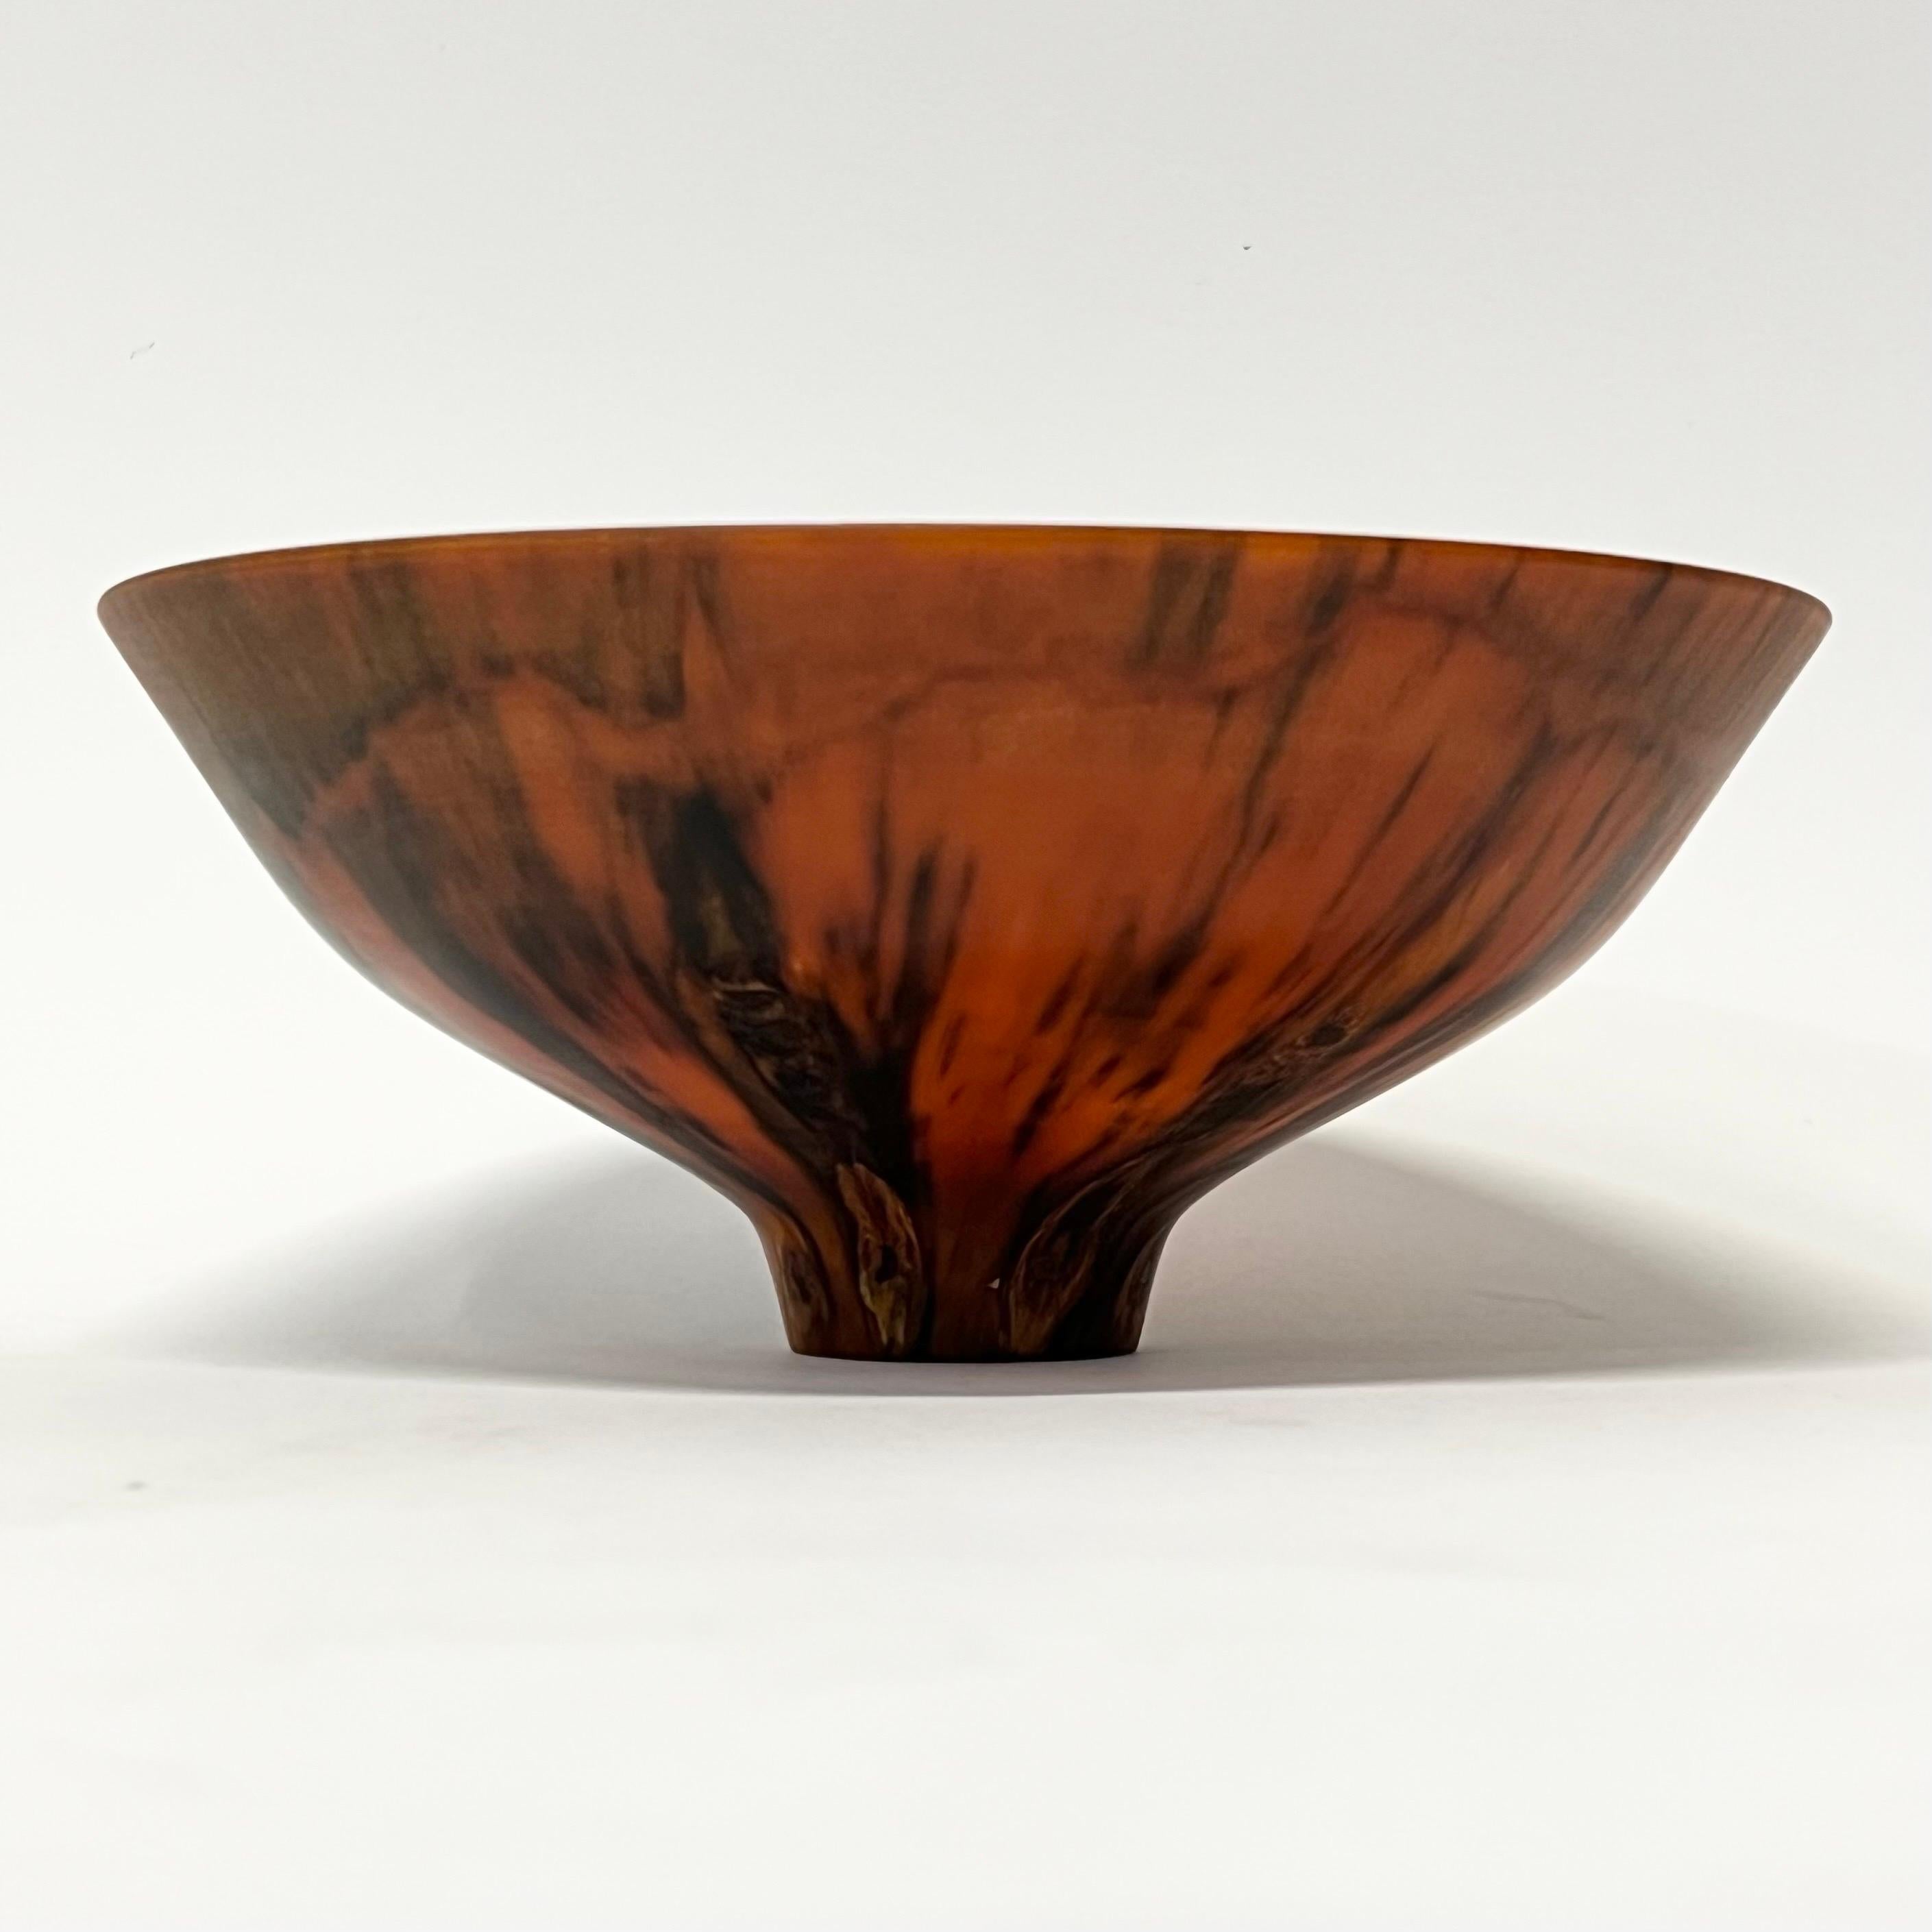 Stunning translucent Norfolk Pine modern bowl by multi-award winning wood lathe artist, Kelly Dunn. Dunn lives on the north end of the Big Island of Hawaii. He has created bowls, hollow vessels, and art forms full time for art galleries and private